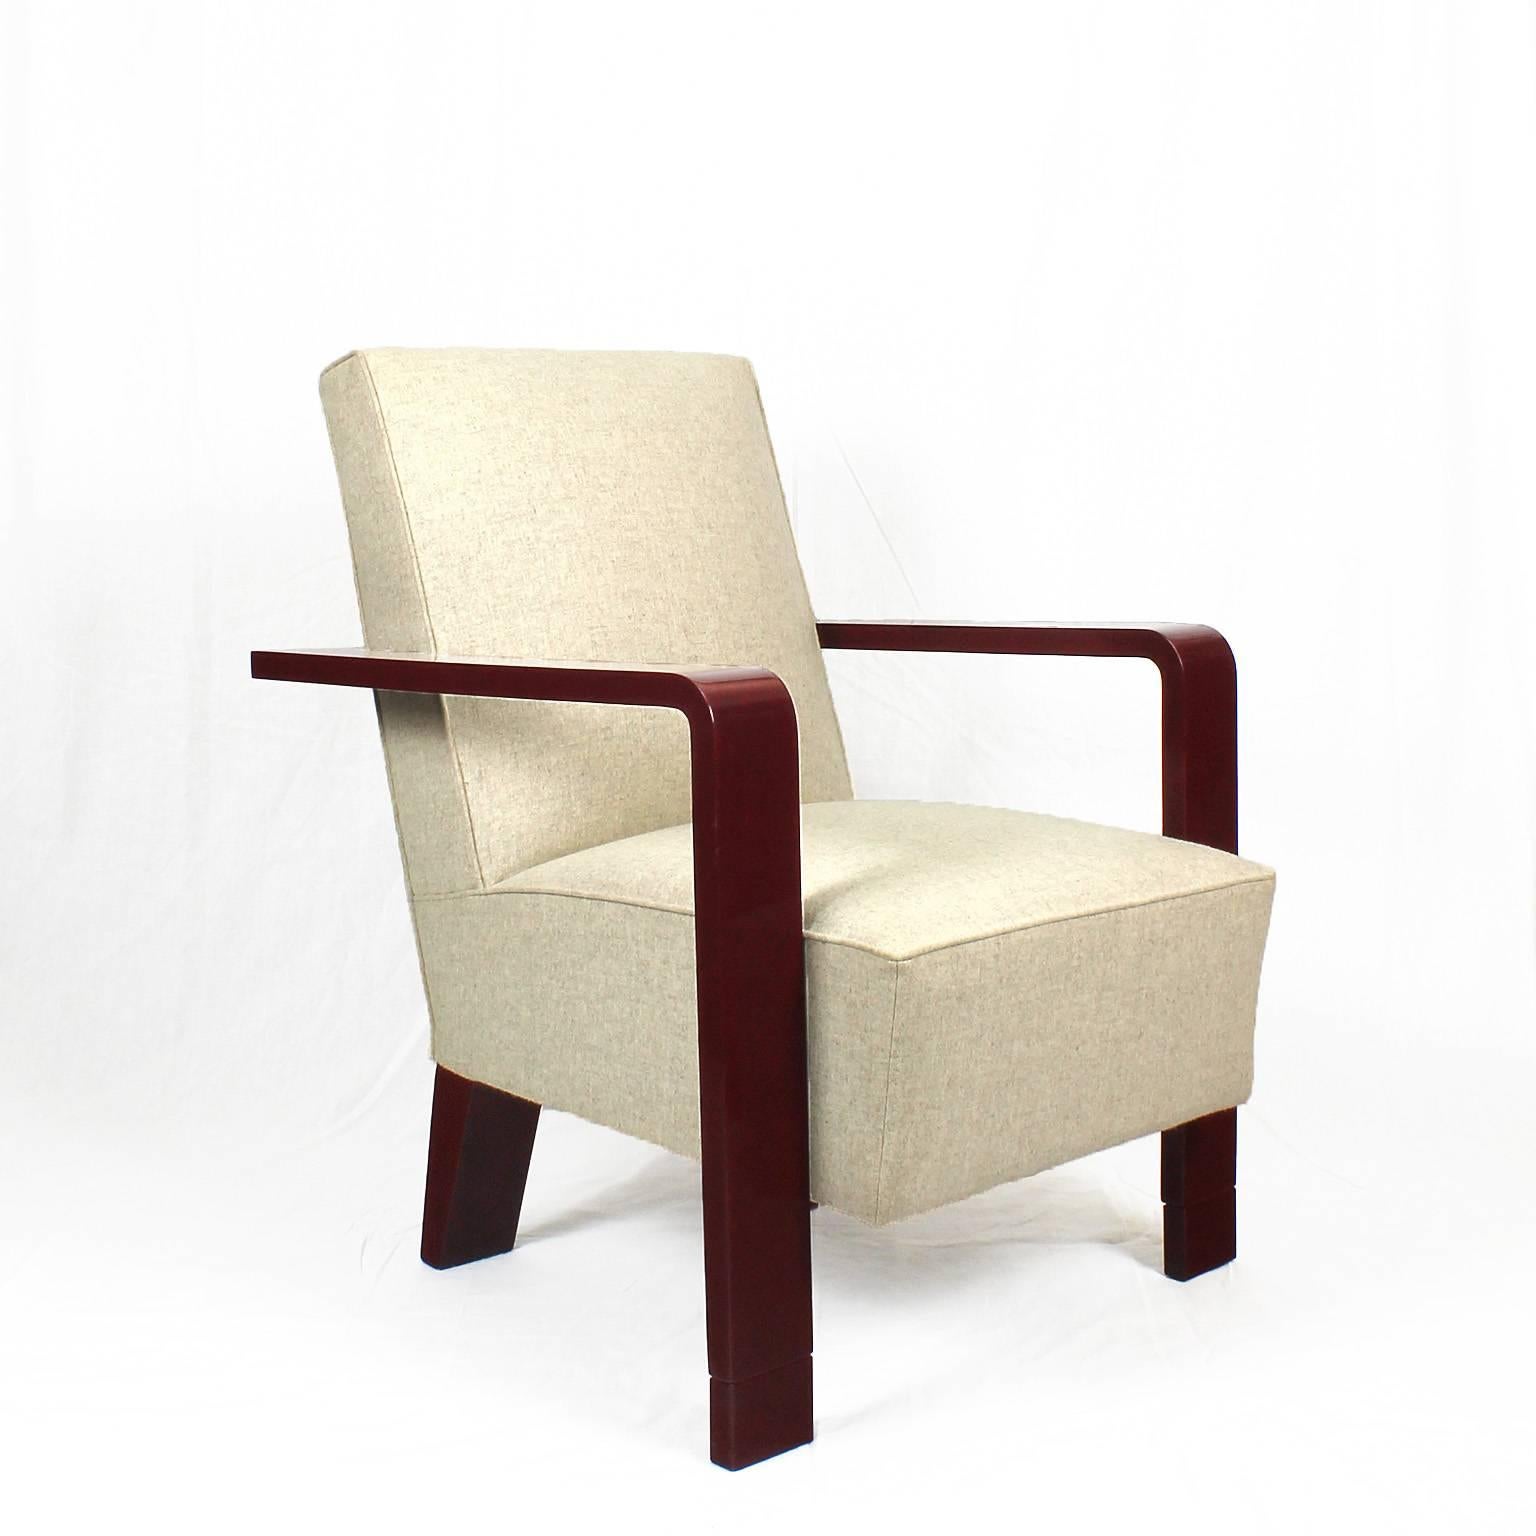 1930s Pair of Art Deco Cubist Armchairs, Lacquered Beech, Off White Wool Belgium (Art déco)